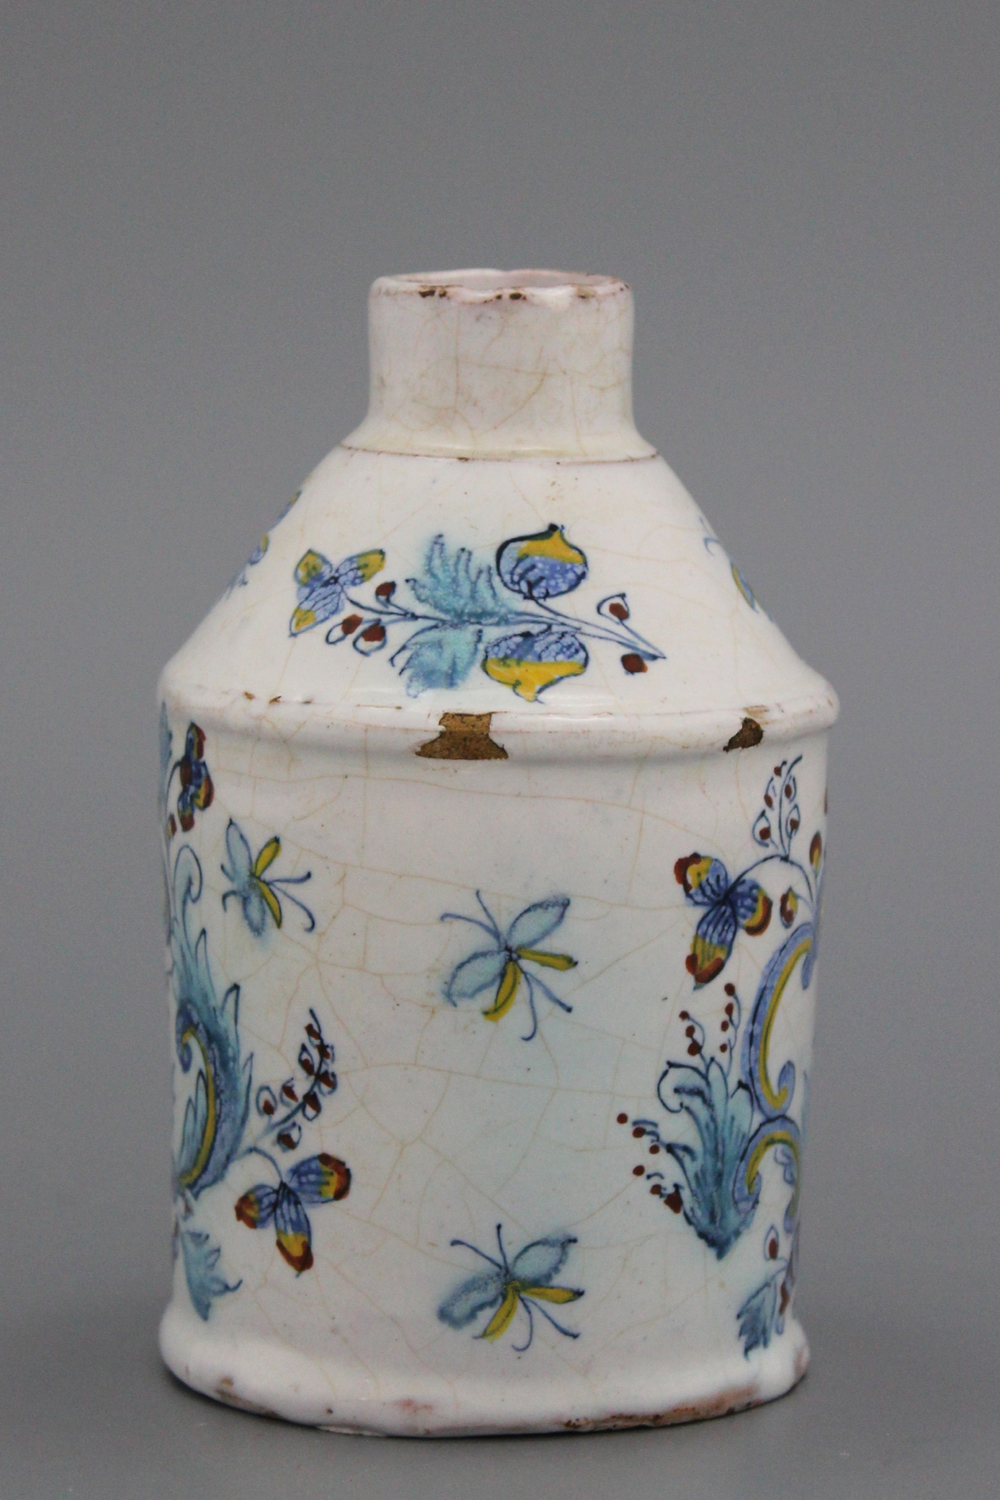 A round Brussels faience tea caddy, 18th C.